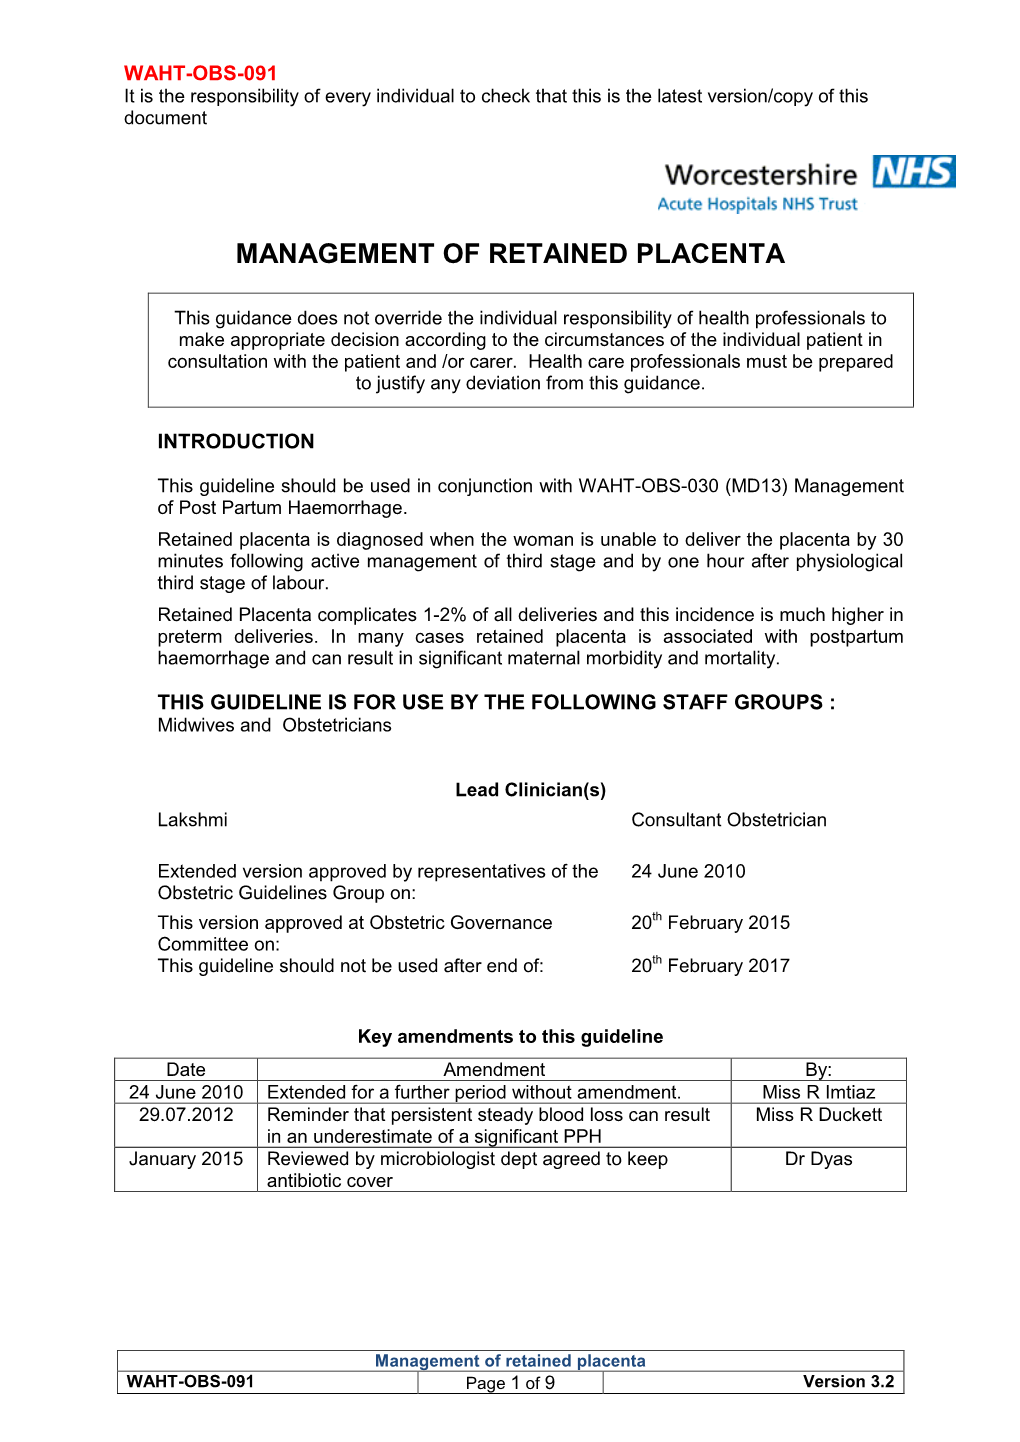 Management of Retained Placenta